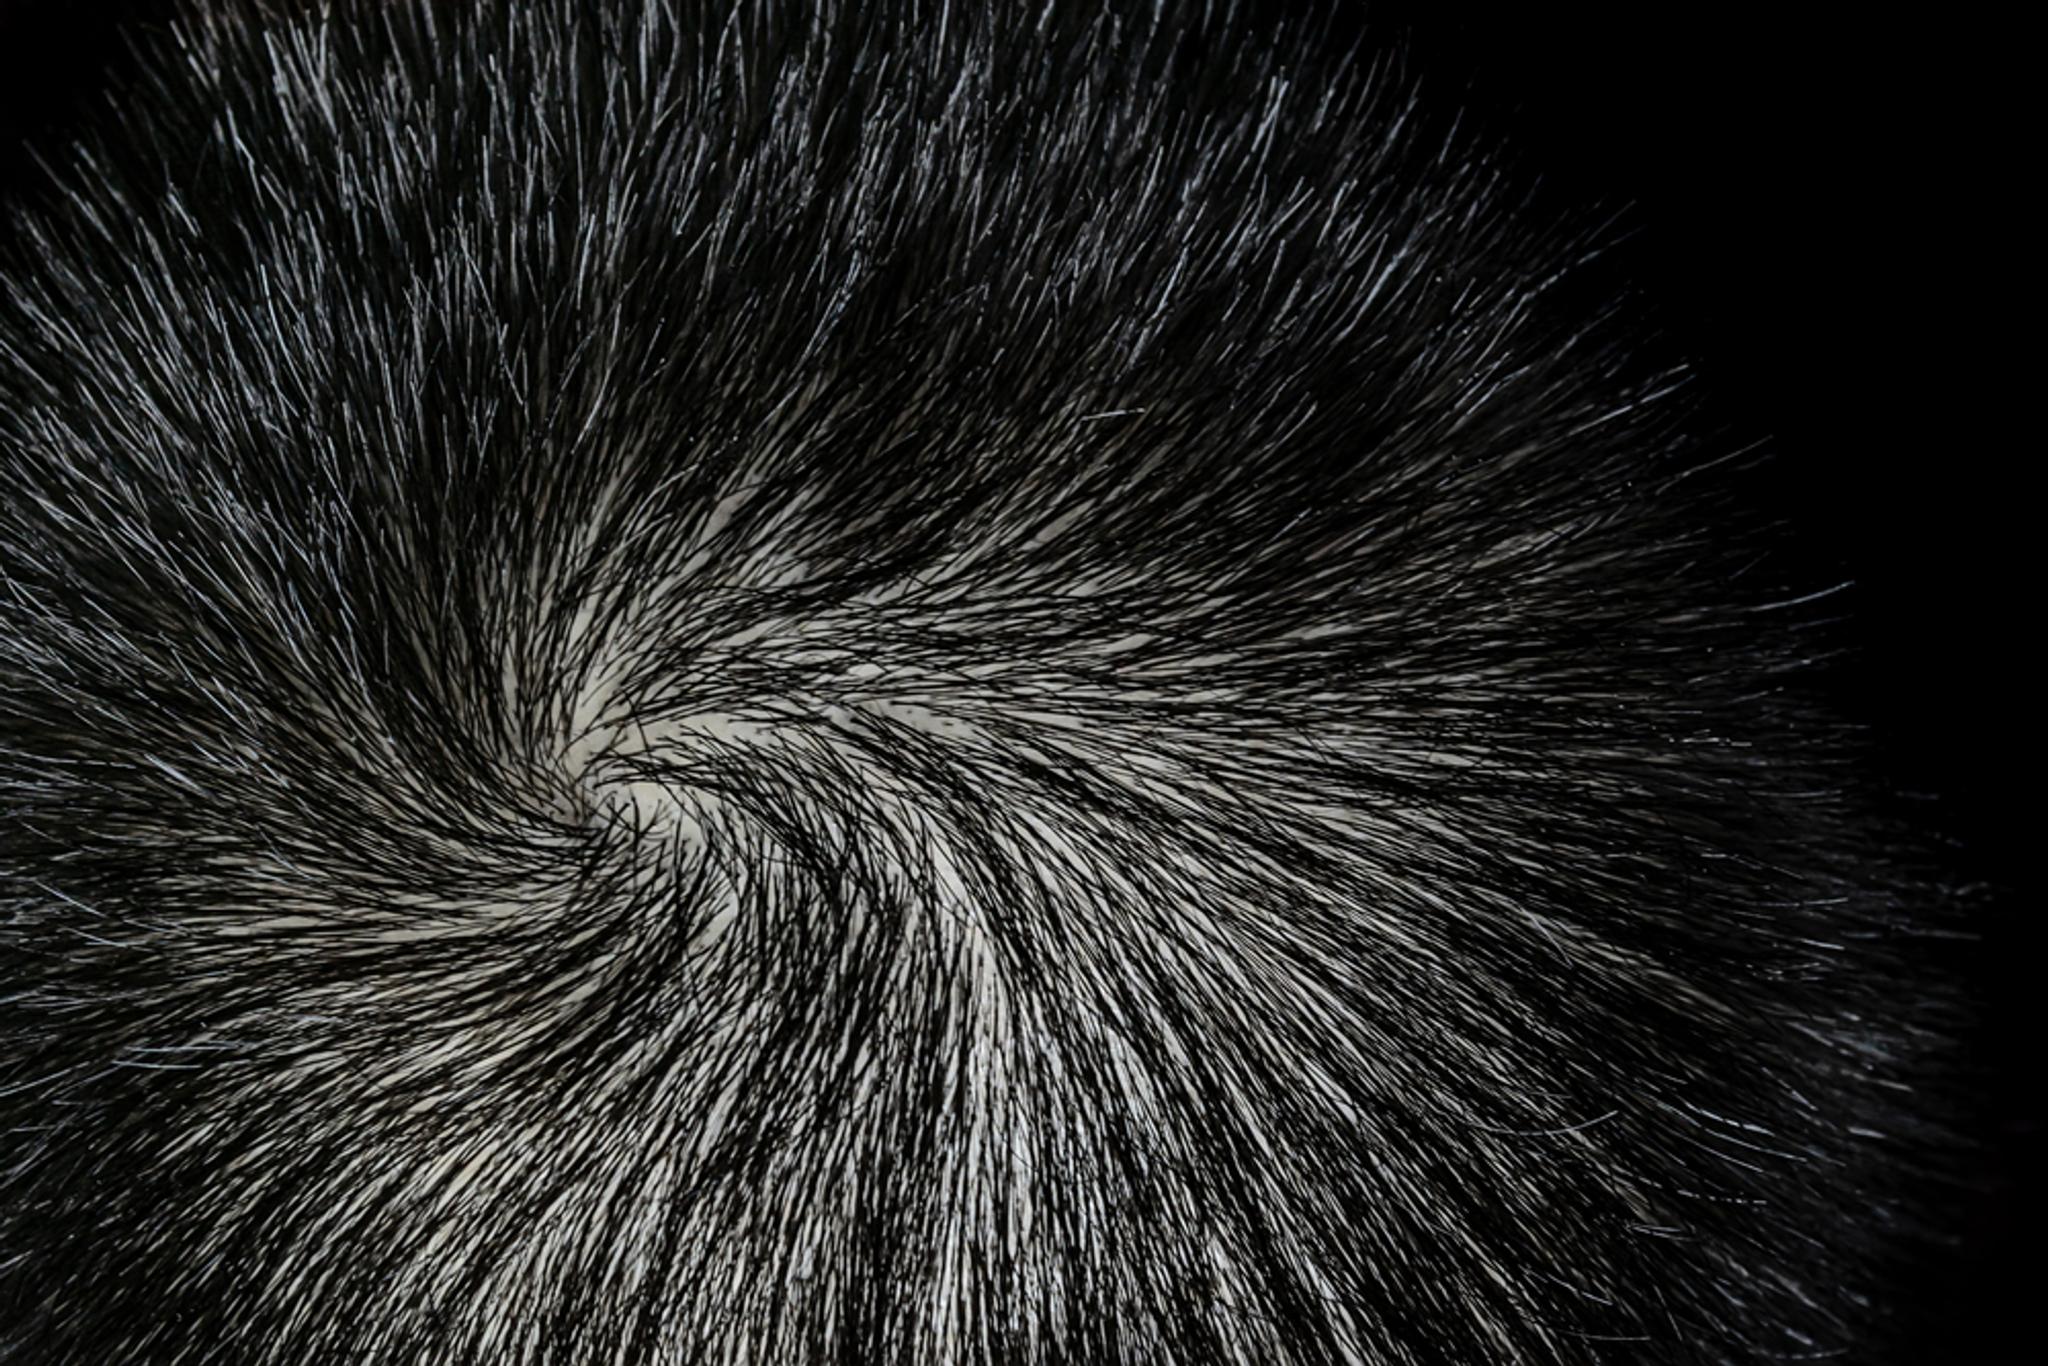 CLose-up of man's head; short black hair swirling from the inside out.